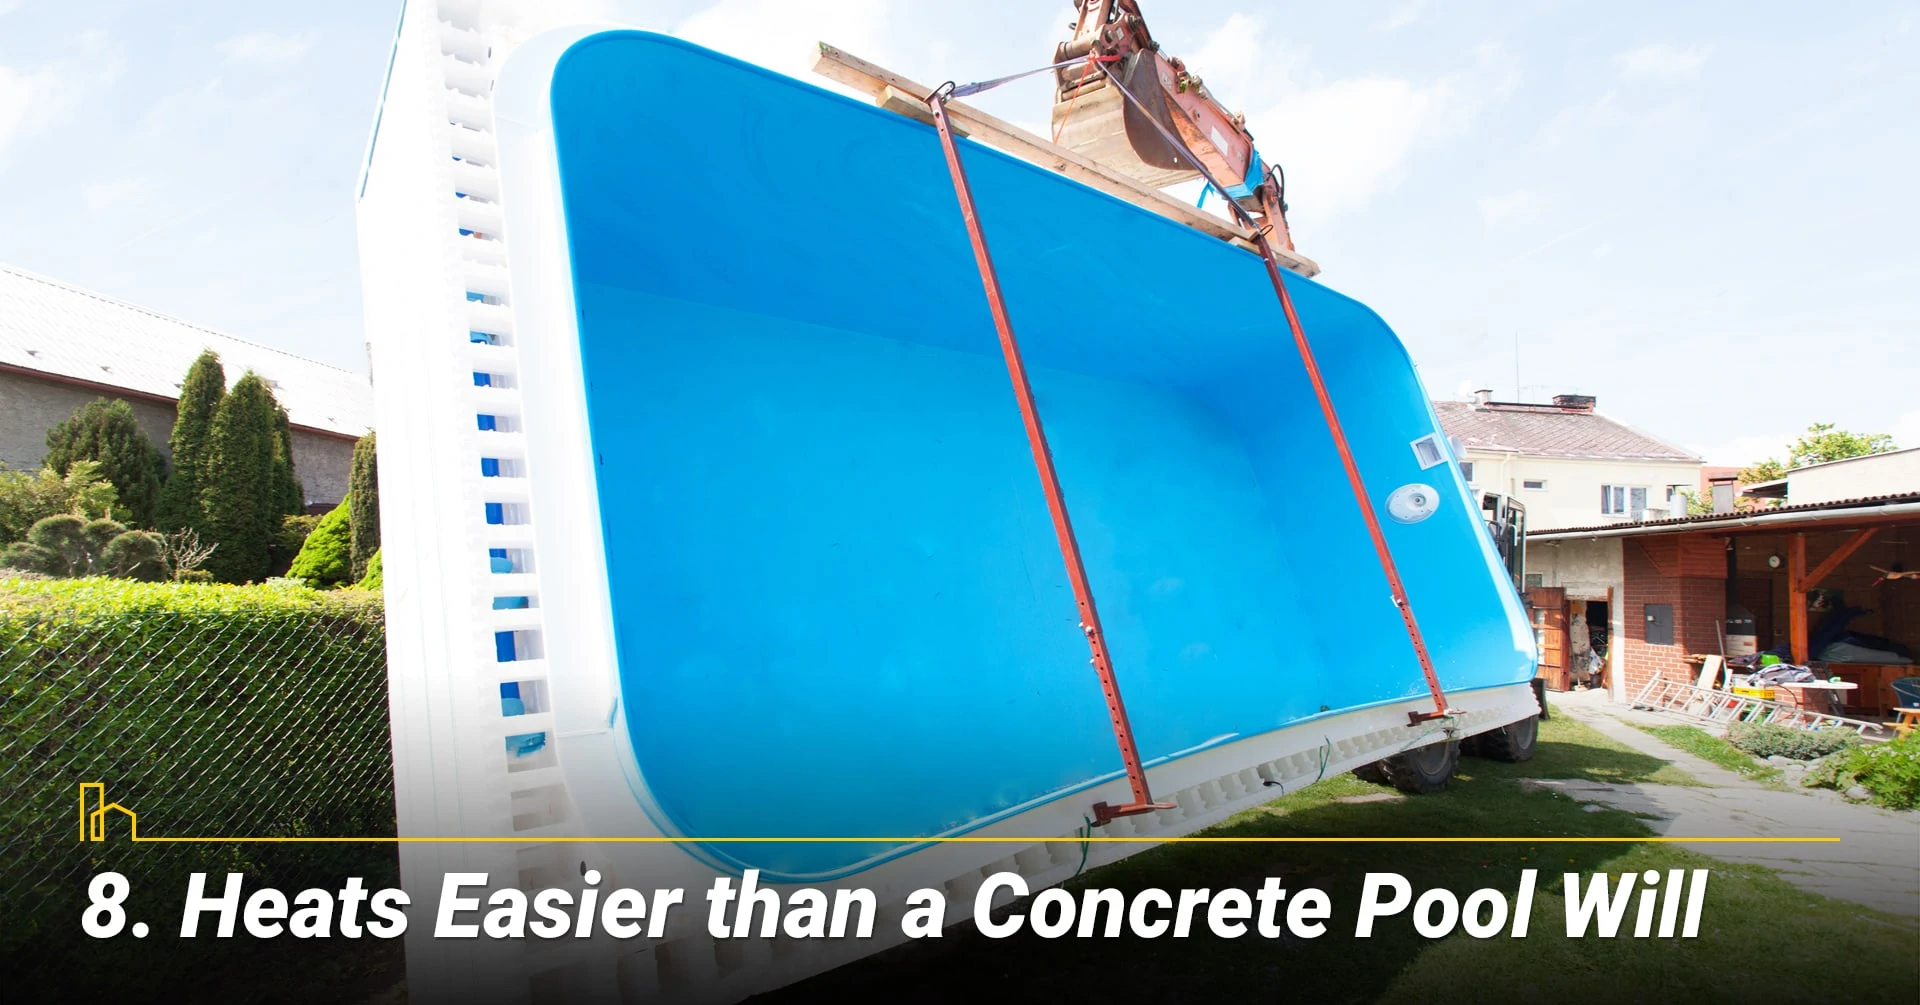 Heats Easier than a Concrete Pool Will, use less energy to warm up the pool